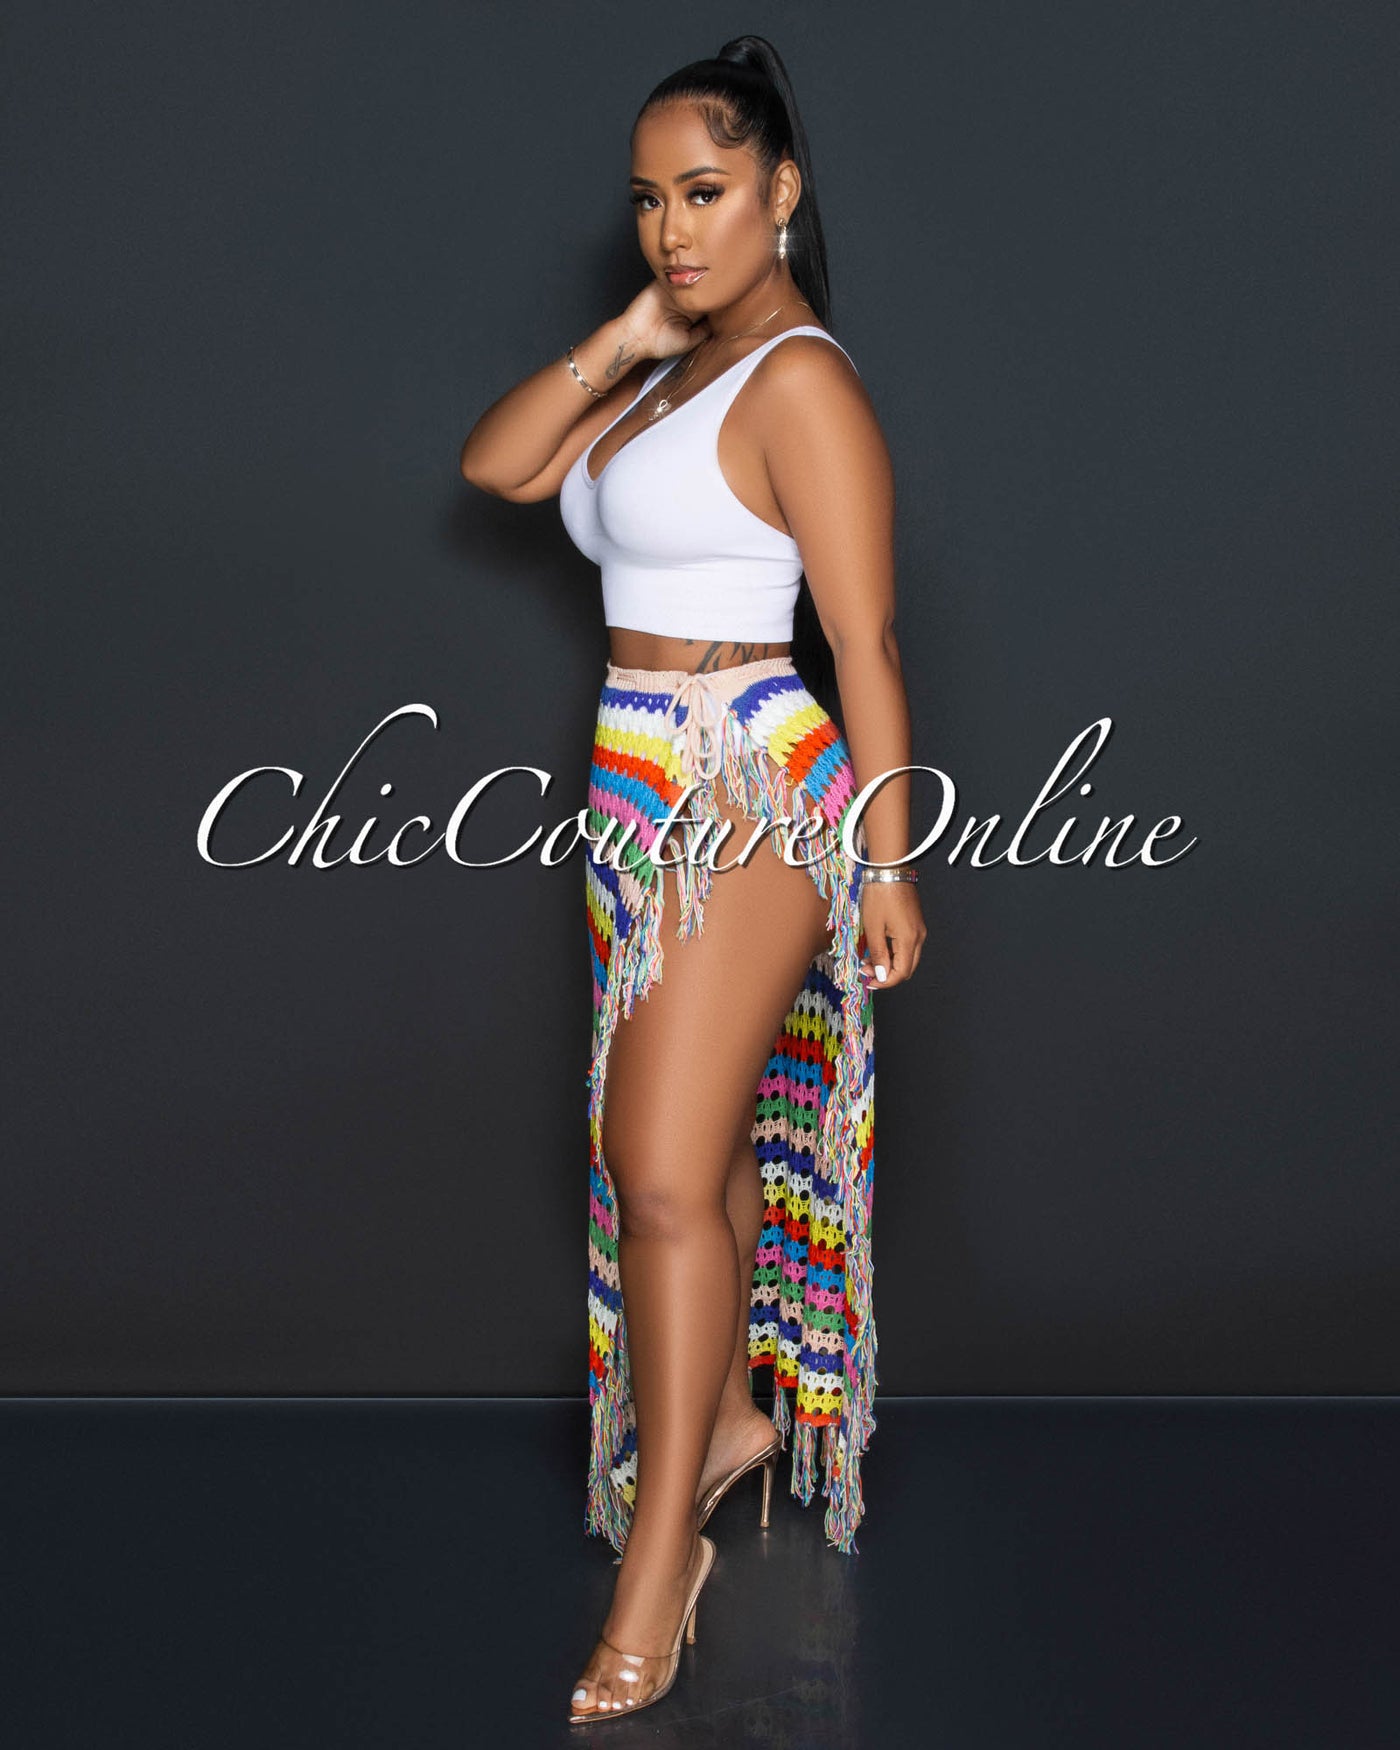 Cary Multi-Color Stripes Crochet Cover-Up Maxi Skirt